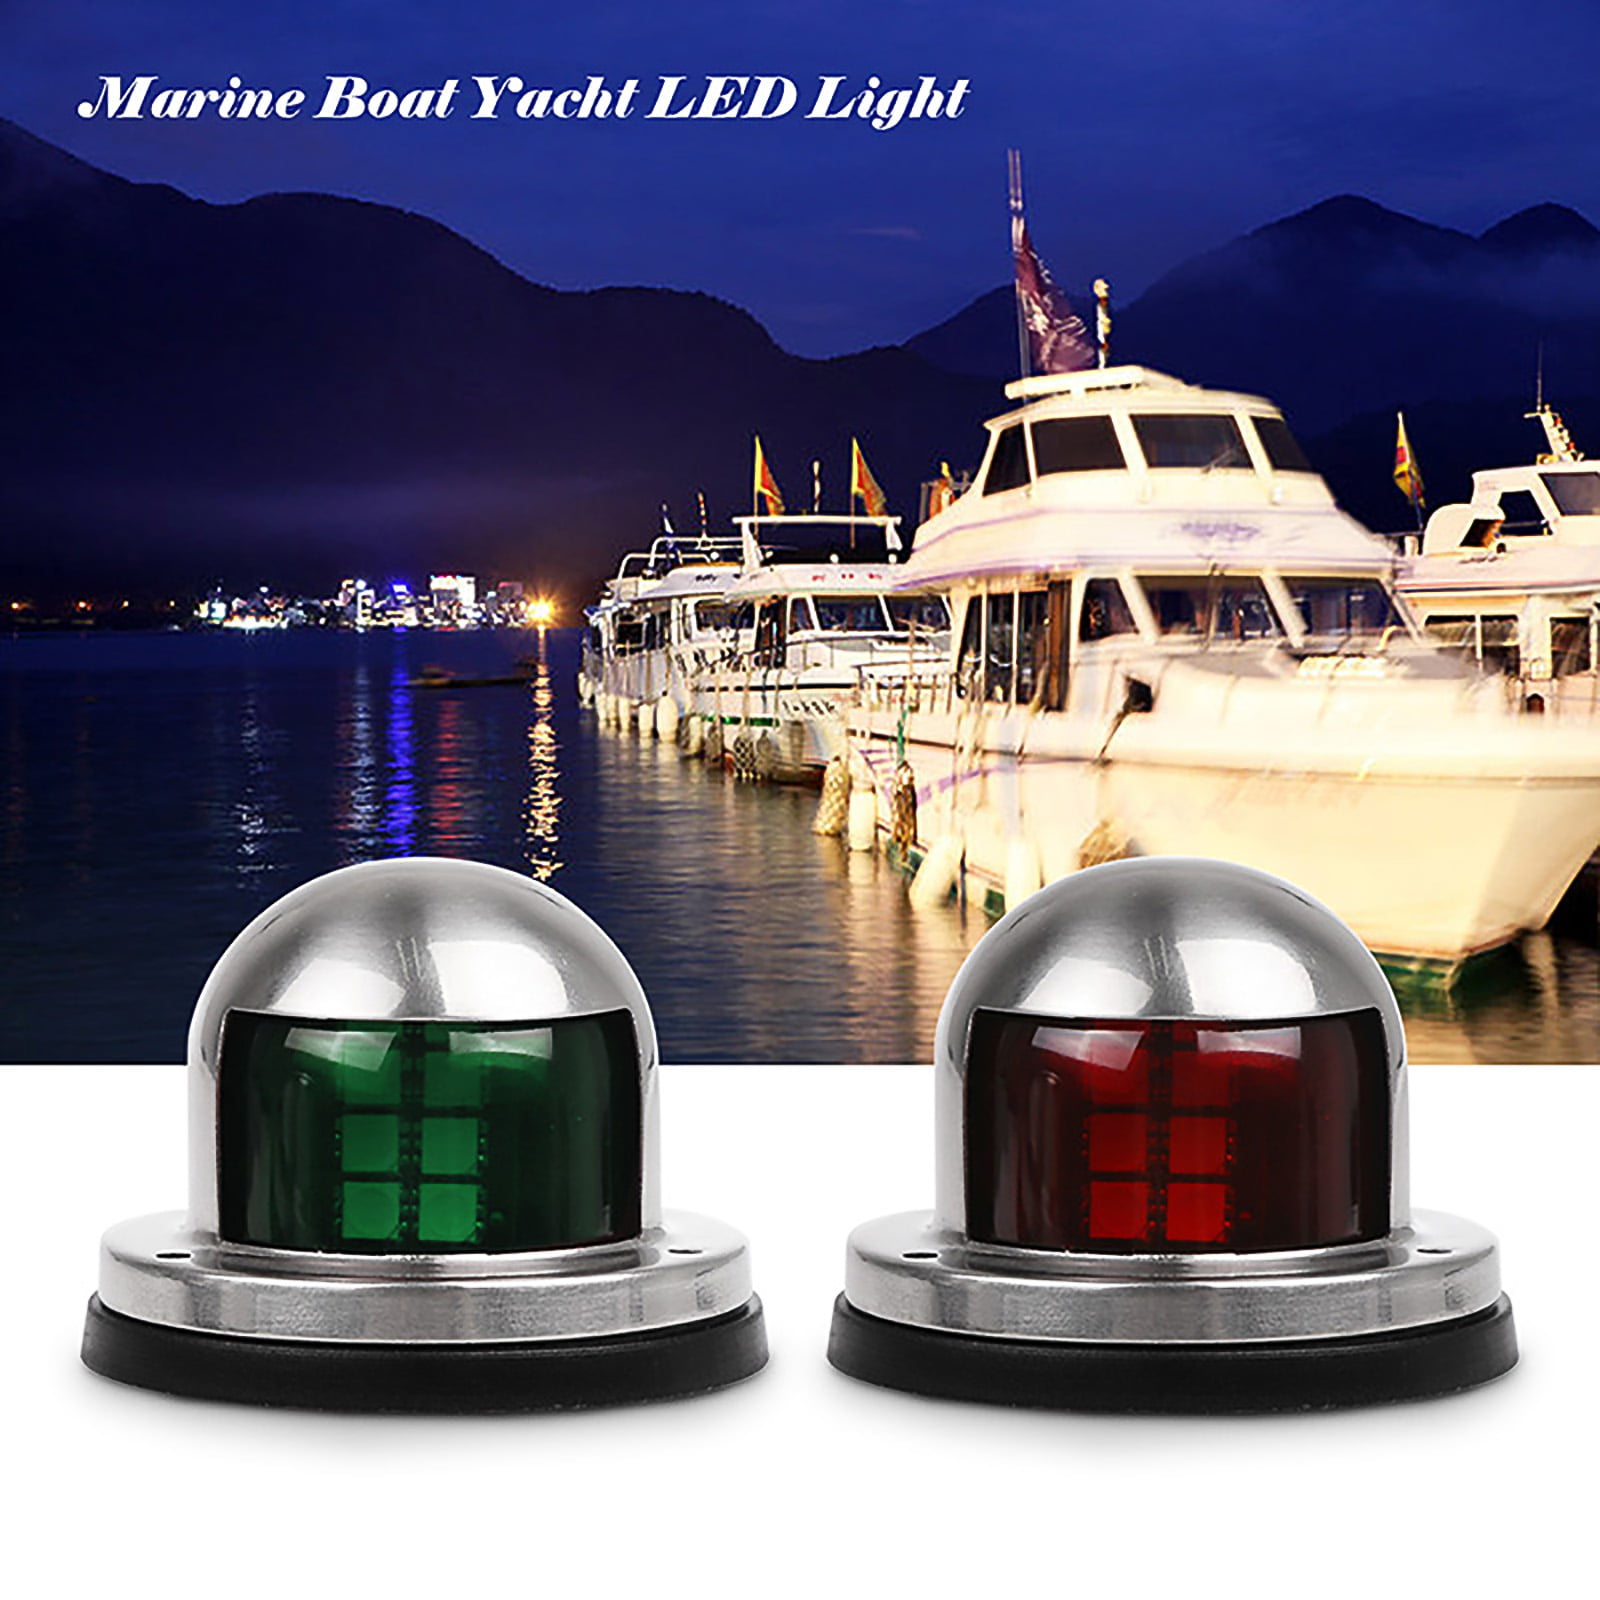 Suitable for fishing boats - LED navigation lights 12 volt waterproof red and green yachts Stainless steel marine LED navigation lights Niciksty A pair of LED navigation lights